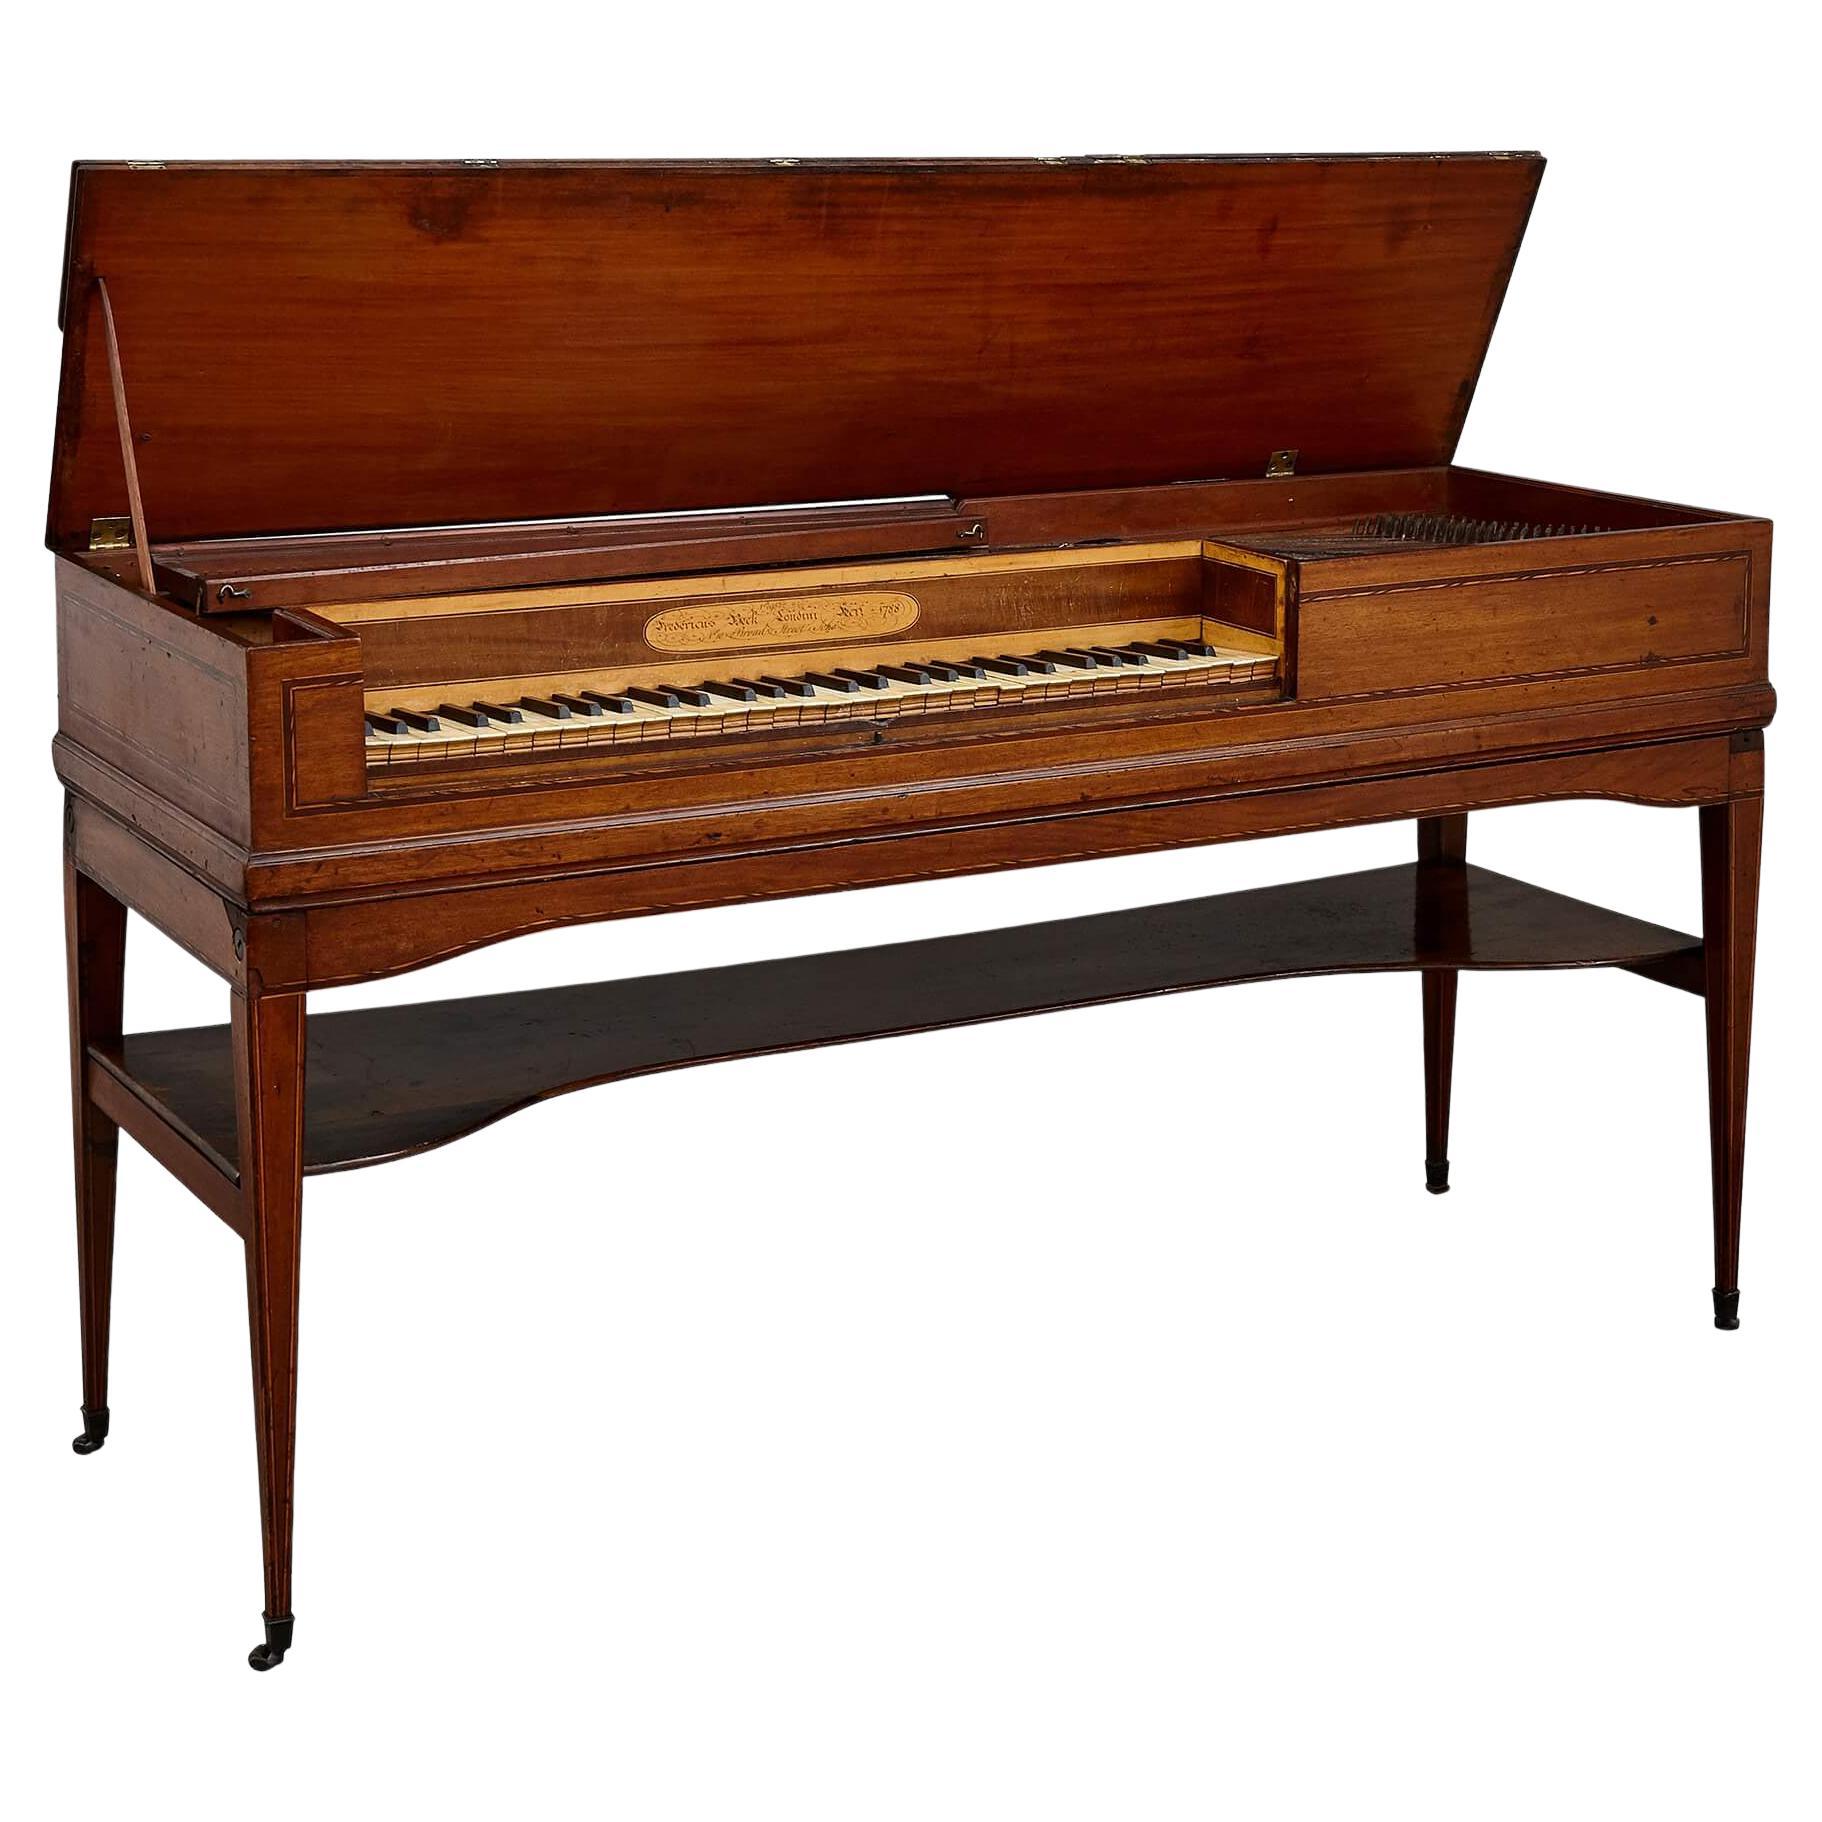 Antique George III Period Square Piano by Beck